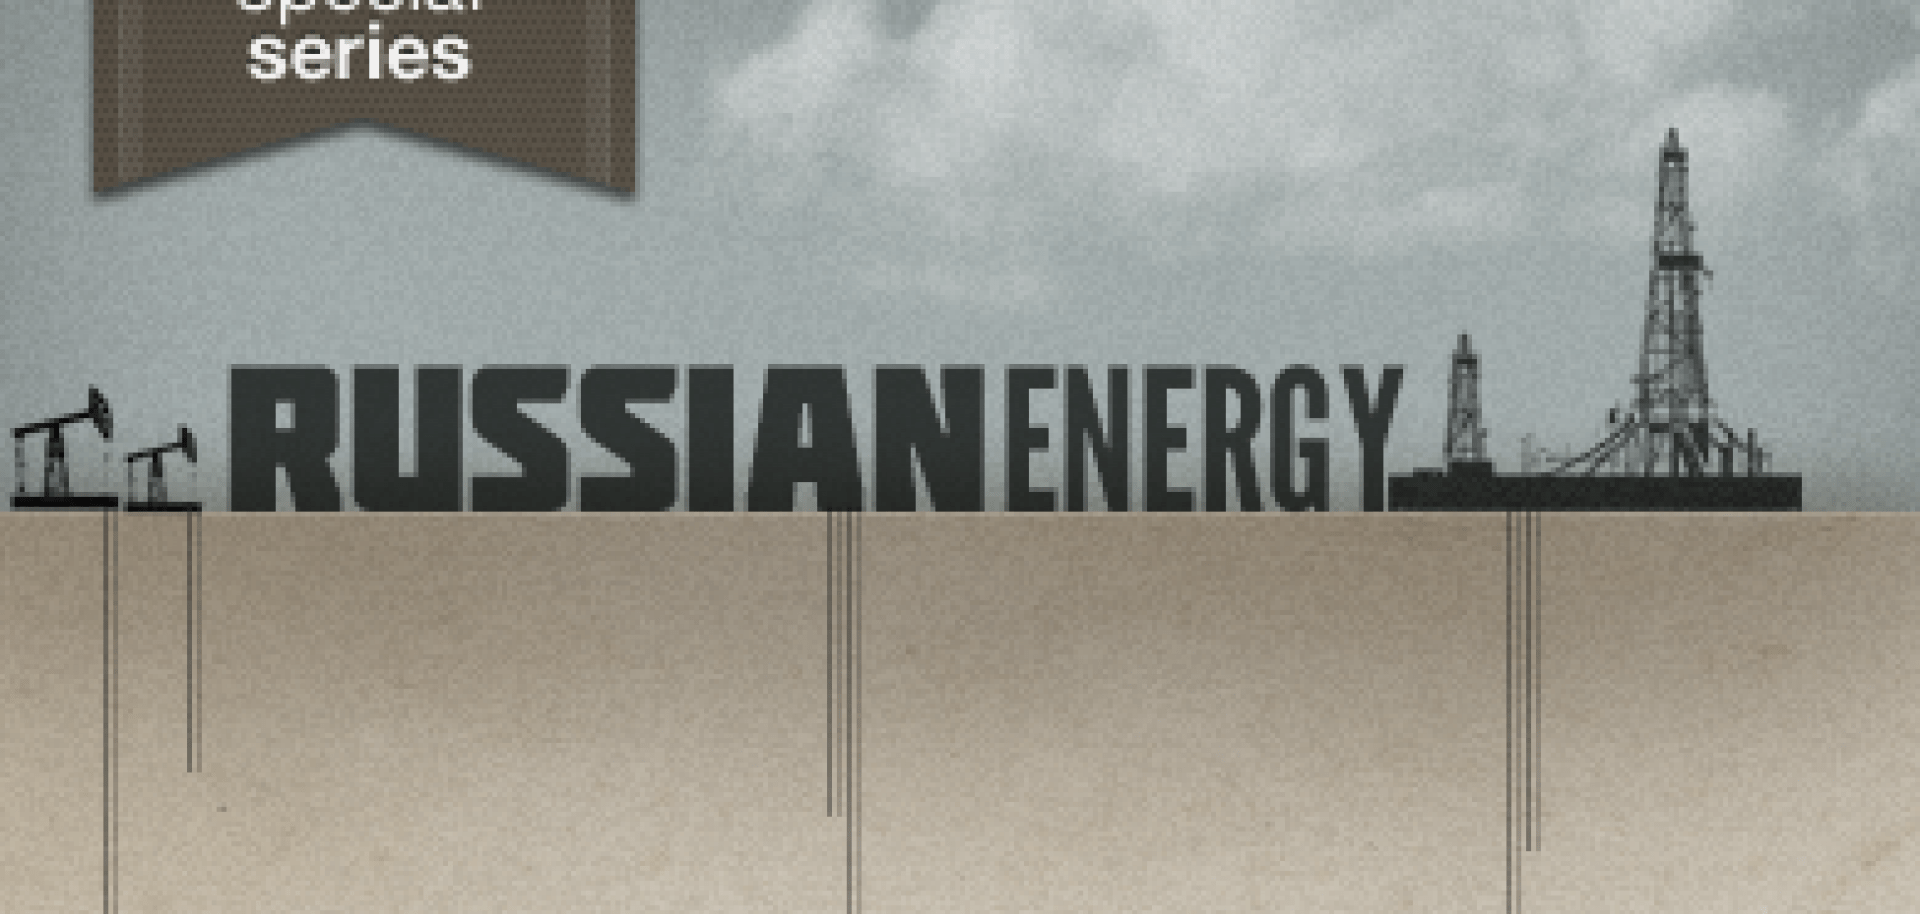 Special Series: Russian Energy